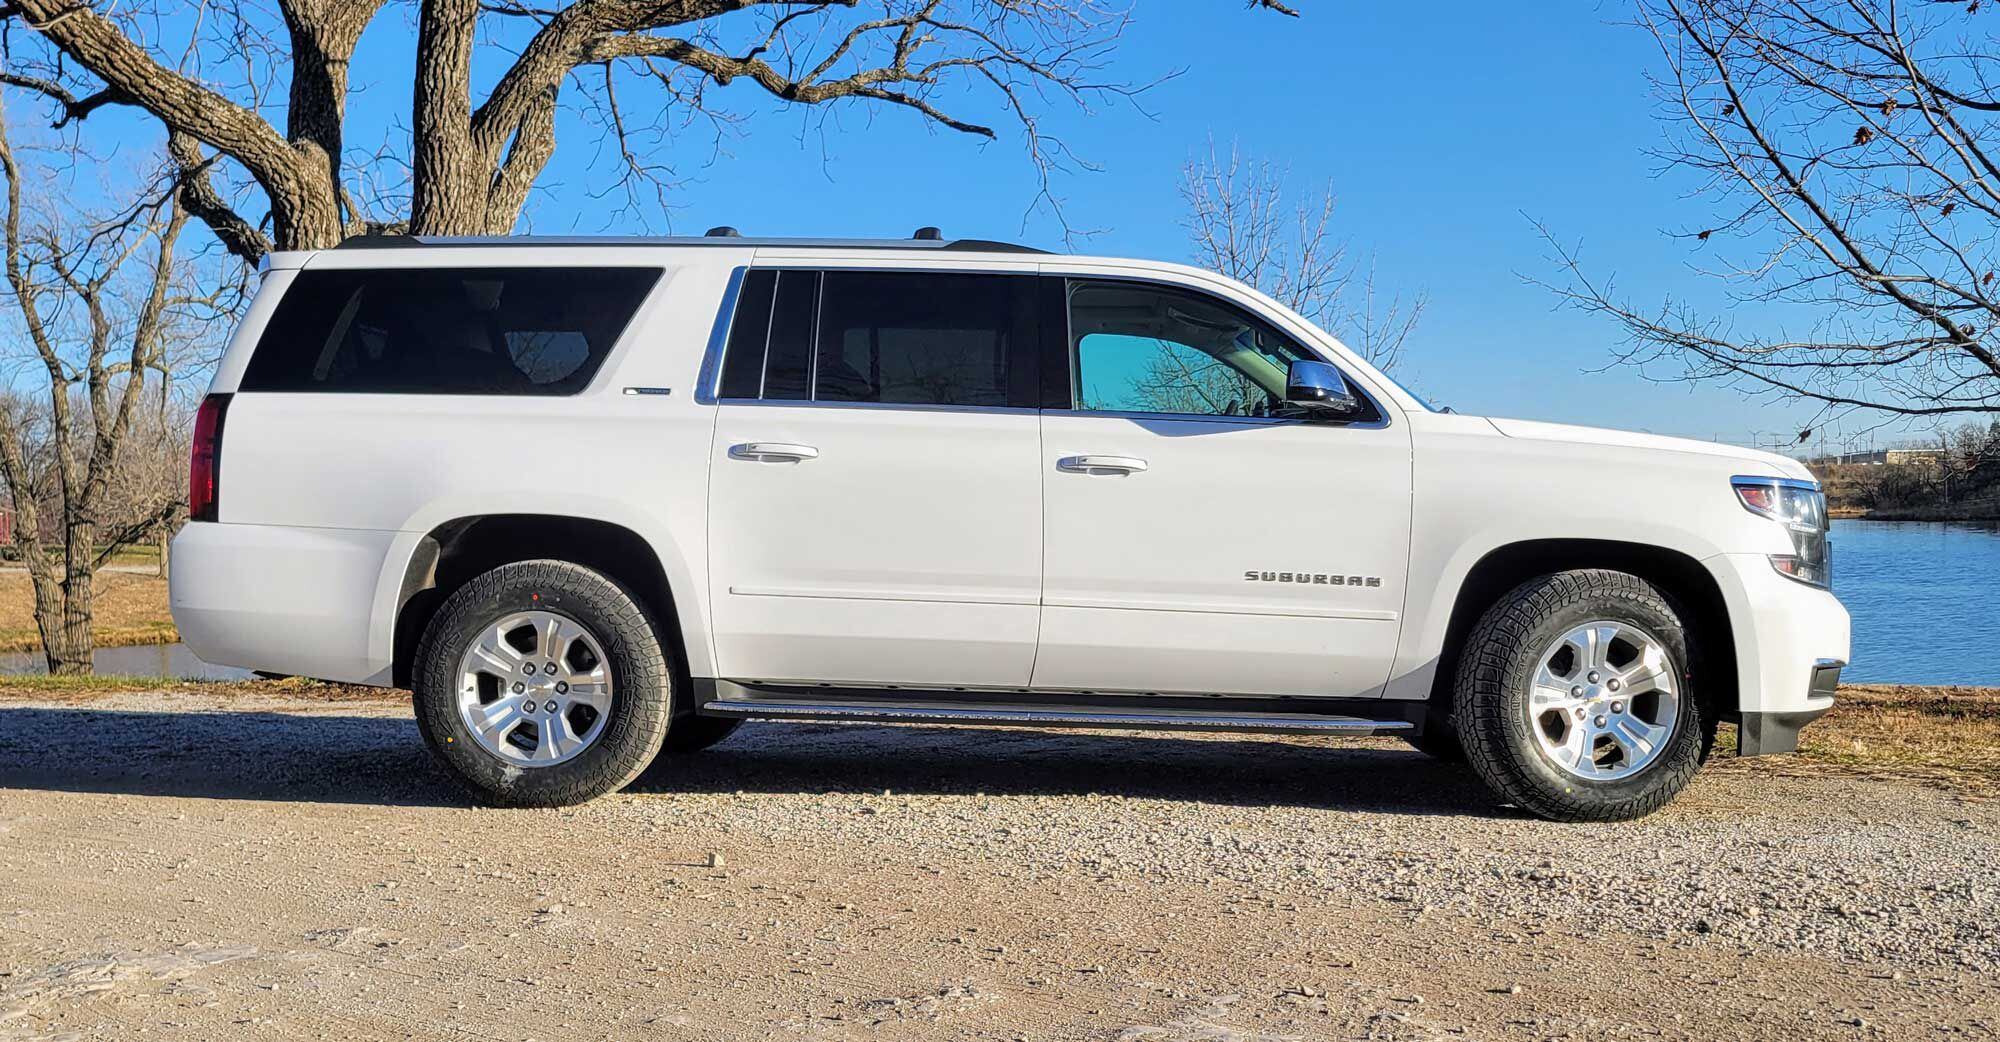 We run Vredestein Pinza ATs on a 2017 Chevrolet Suburban Premier. It’s not exactly an off-road rig, but the Pinzas give it ample traction wherever we take it.